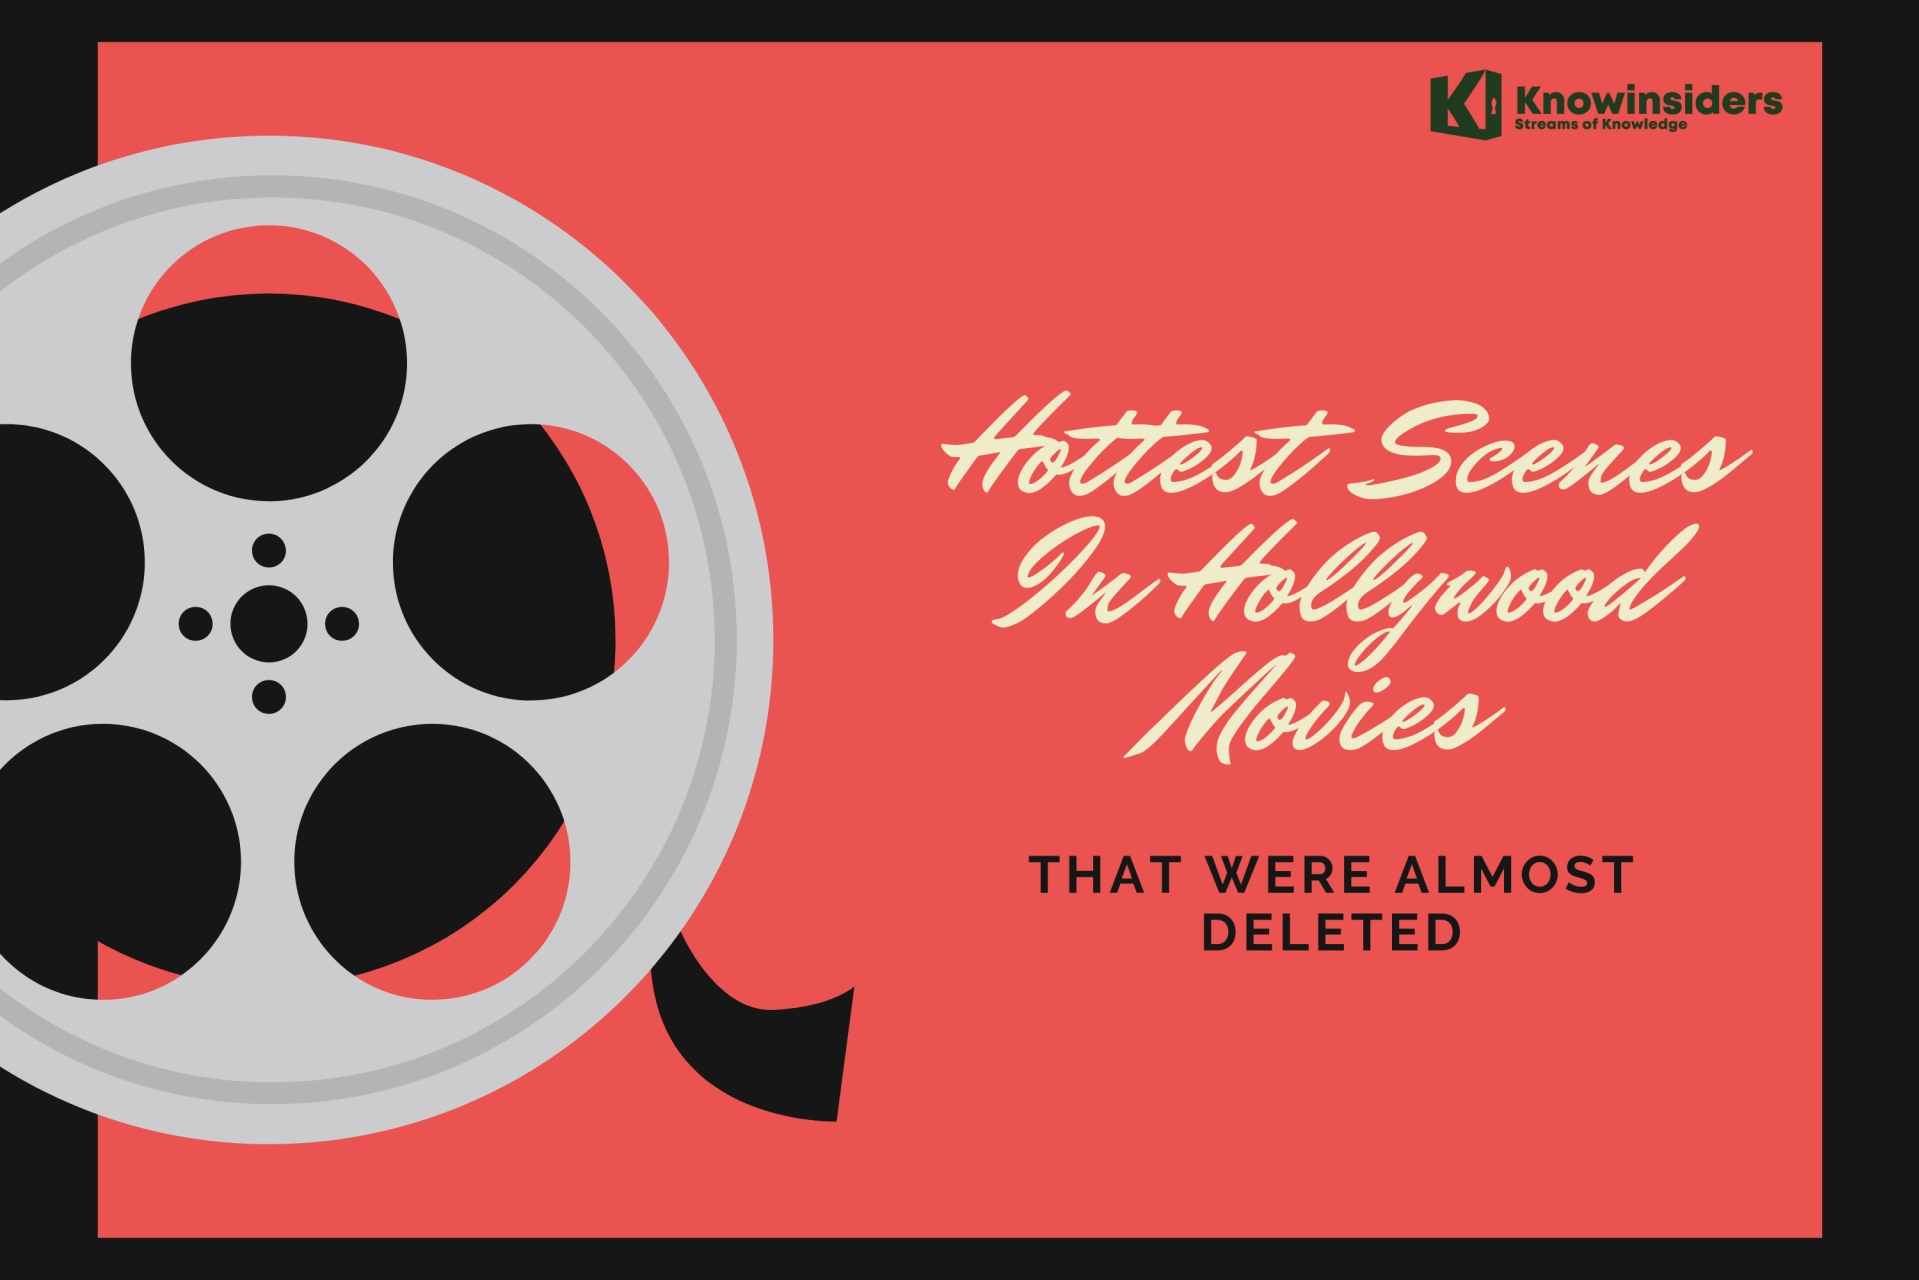 Top 5 Hottest Scenes In Hollywood Movies That Almost Deleted